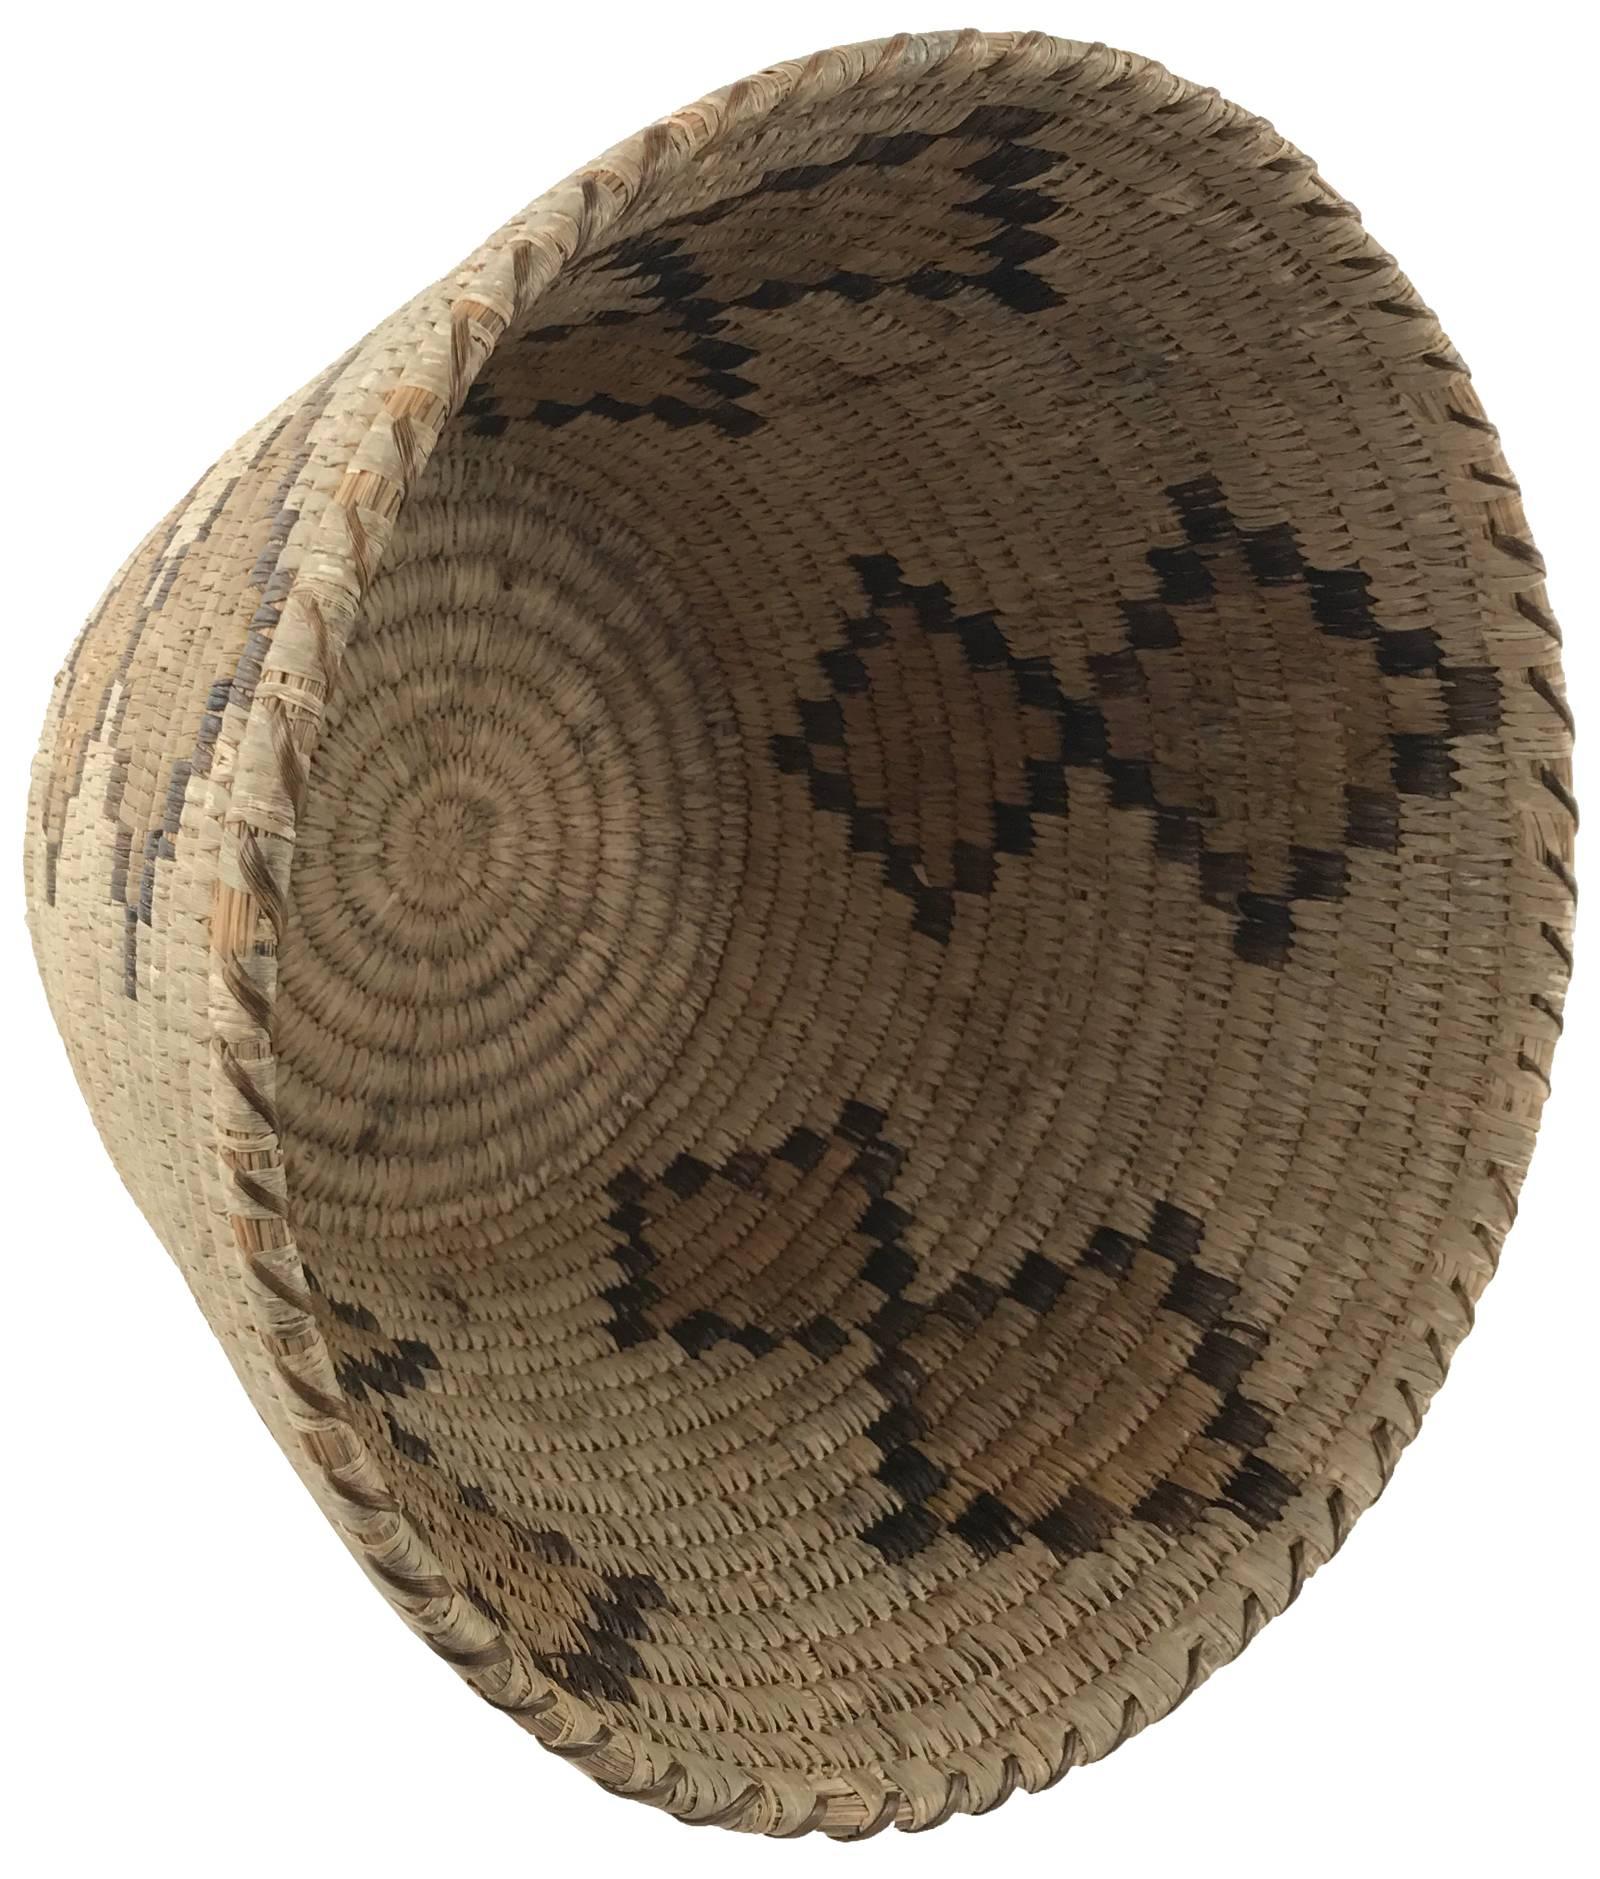 Woven Twined Native American Basket with Diamond Motif